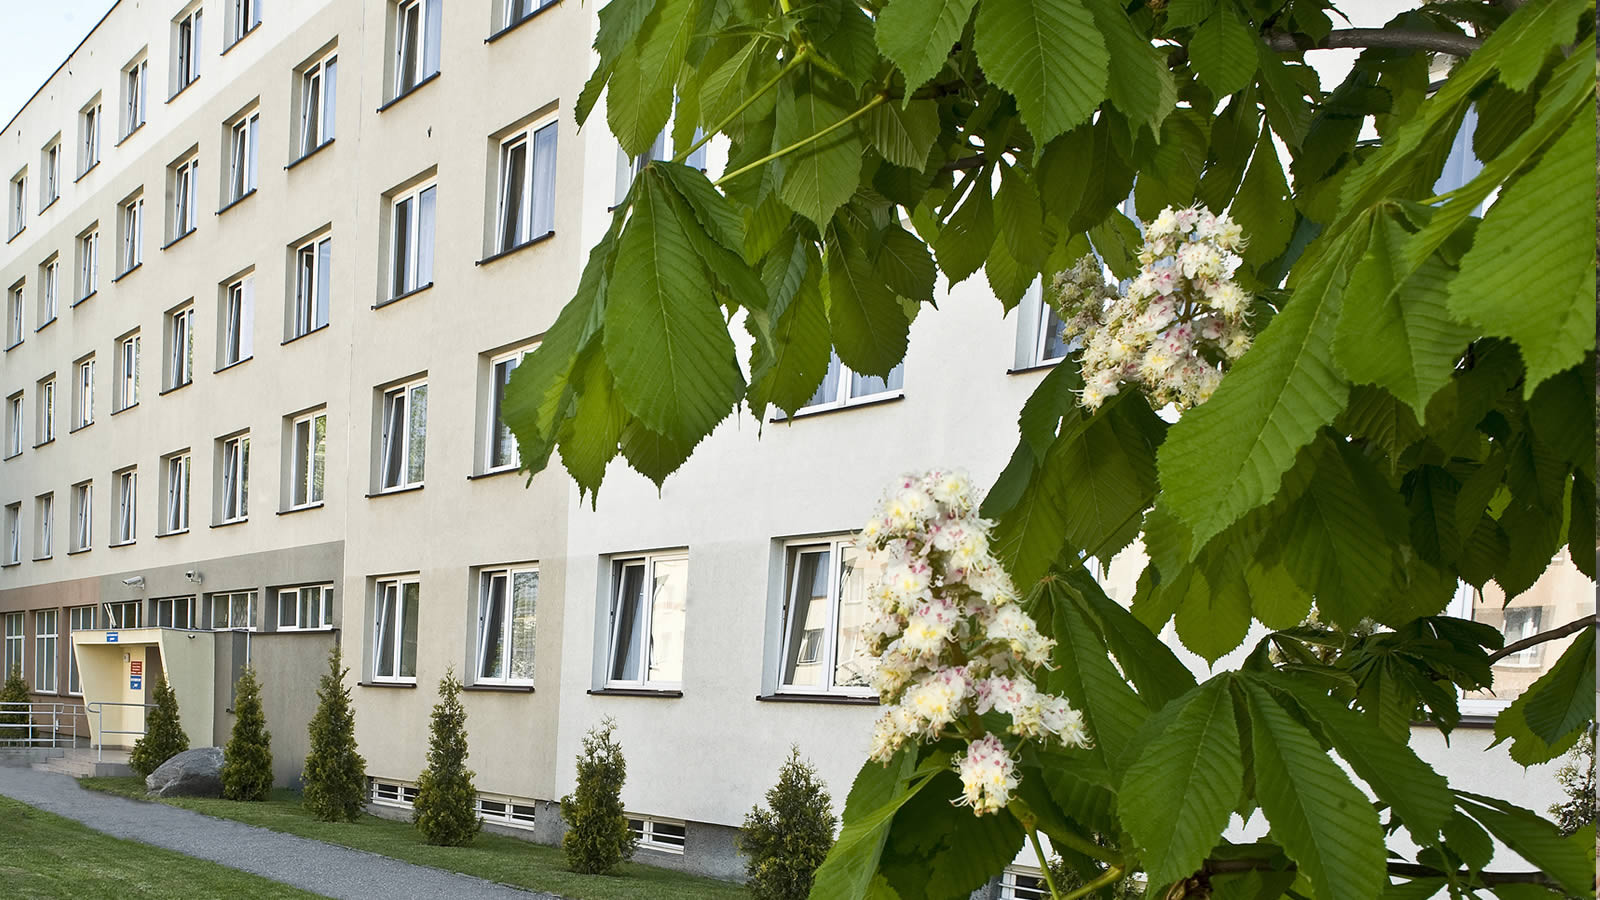 UKW student houses